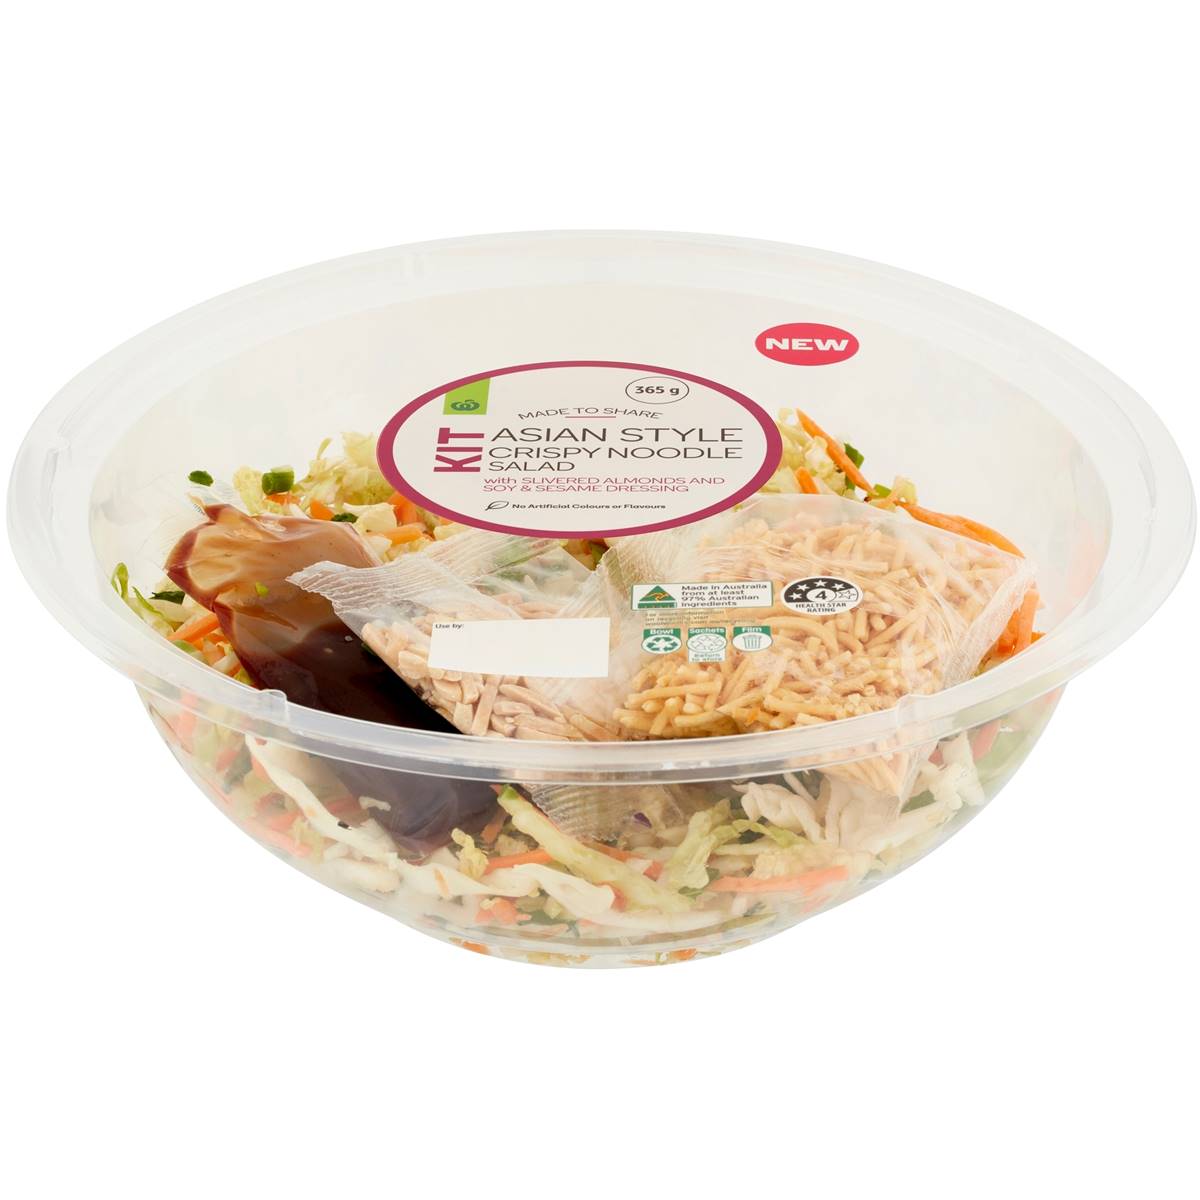 Calories in Woolworths Asian Crispy Noodle Salad Bowl